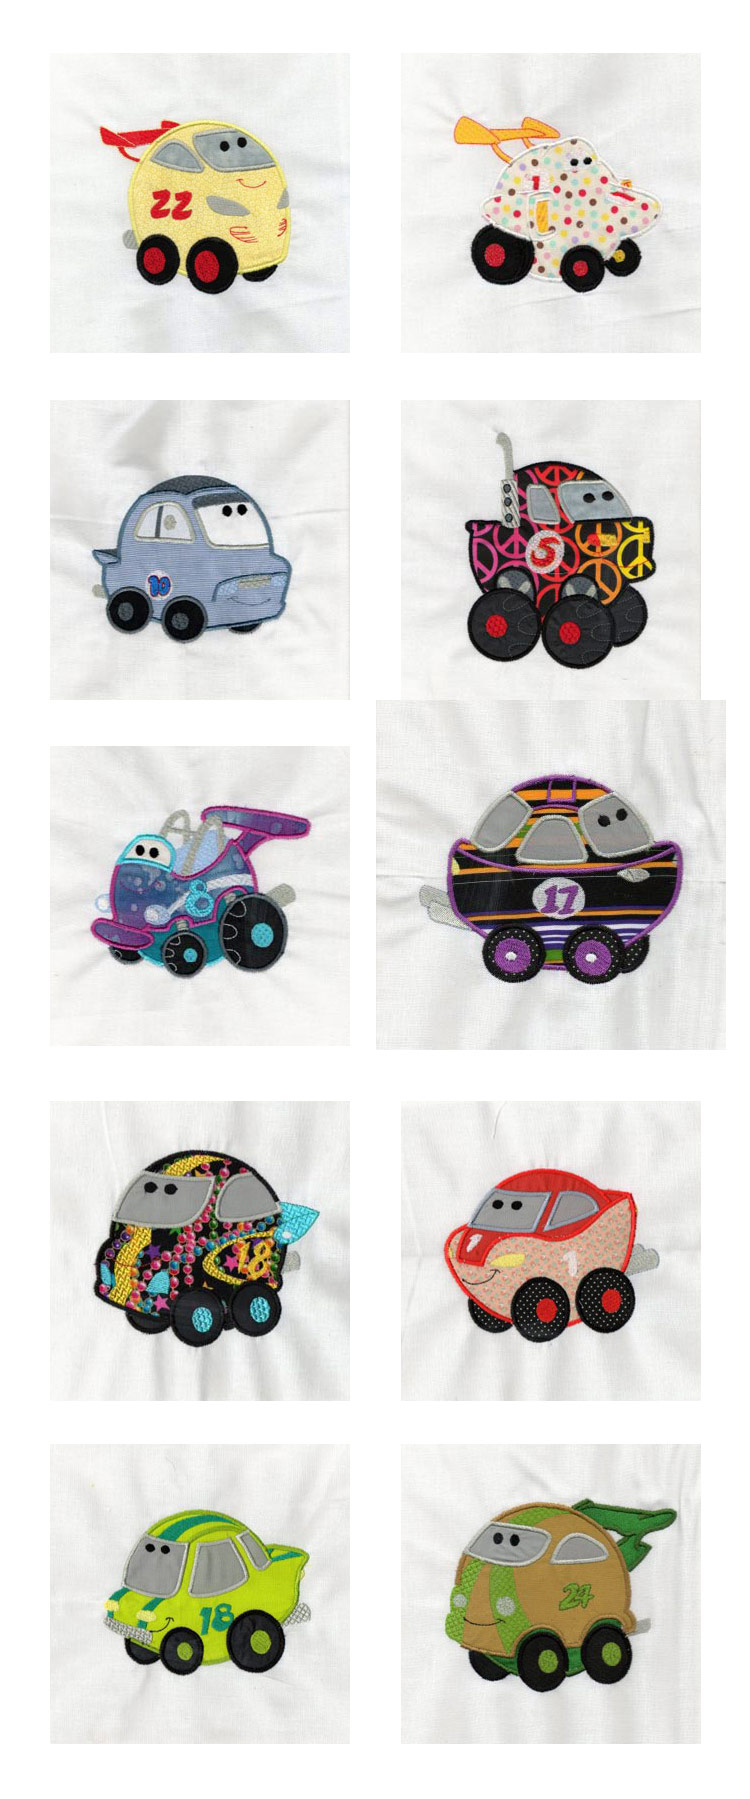 Chubby Cars Applique Embroidery Machine Design Details